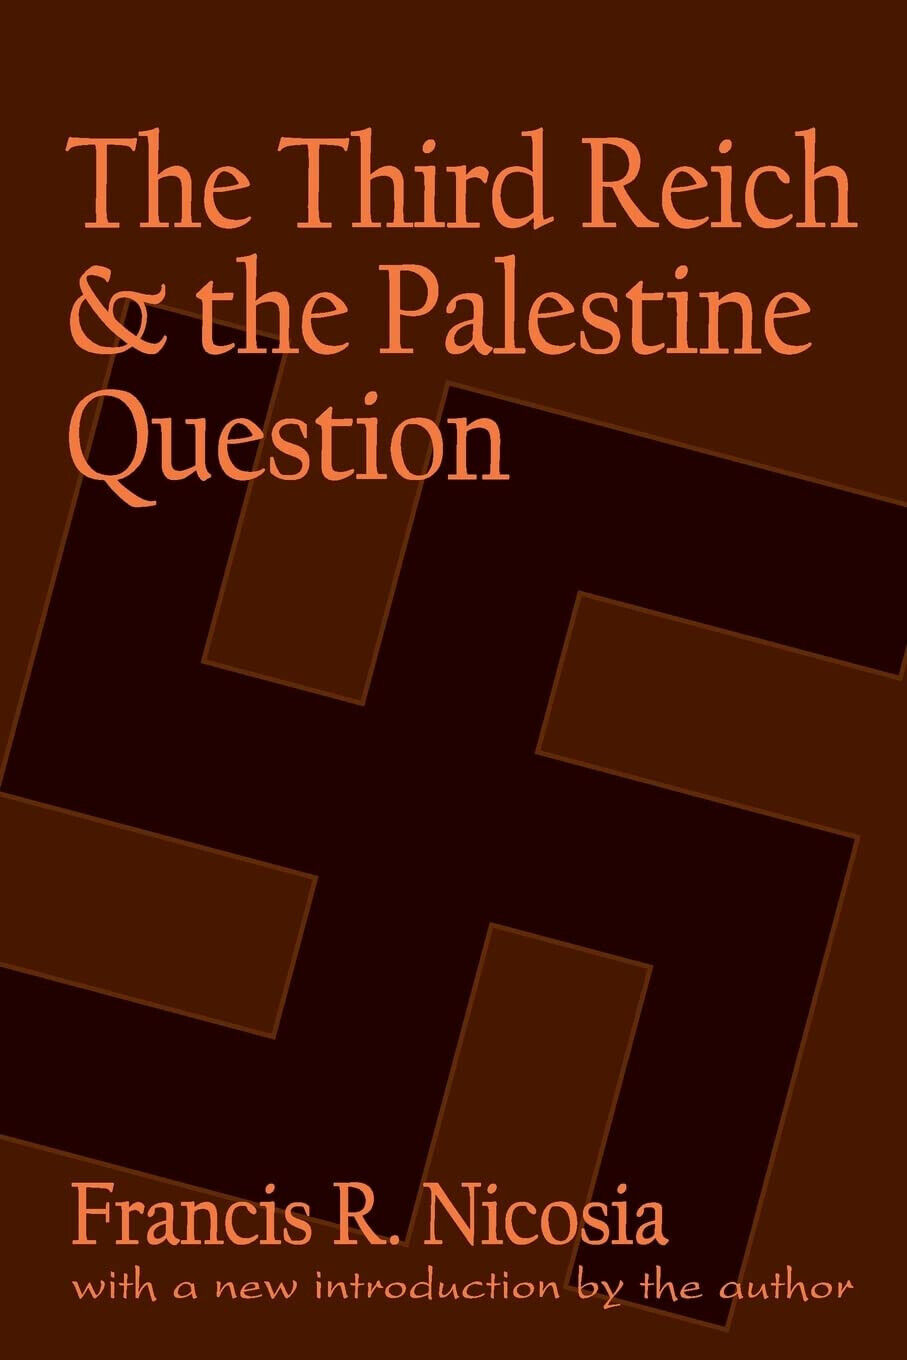 The Third Reich and the Palestine Question - Francis R. Nicosia - 2000 libro usato